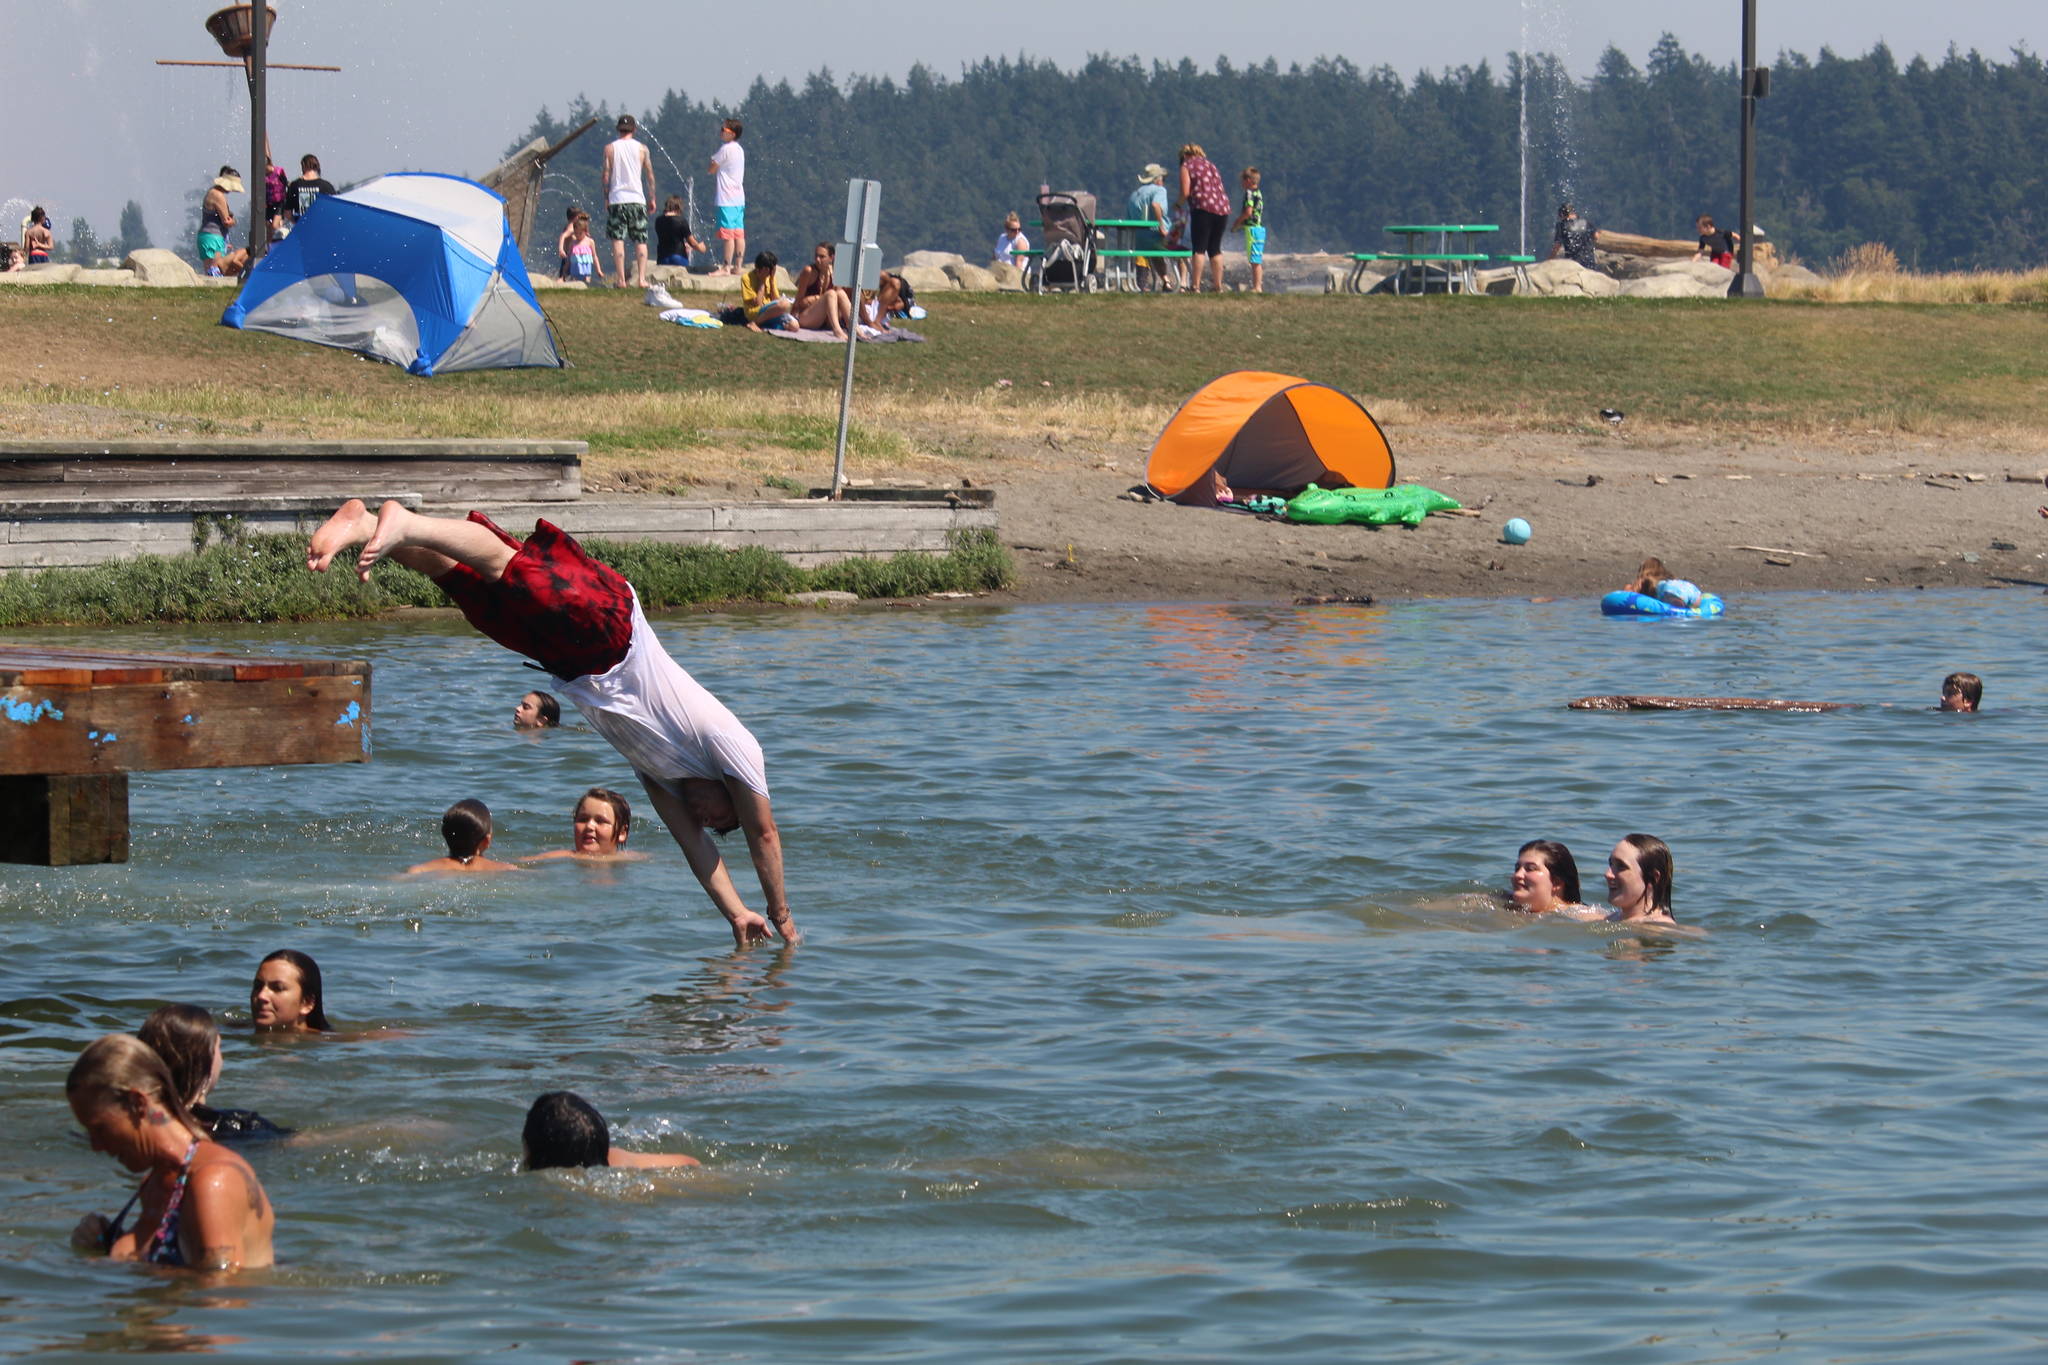 The lagoon and the splash pad at Windjammer Park were popular as residents tried to beat the heat. (Photo by Karina Andrew/Whidbey News-Times)